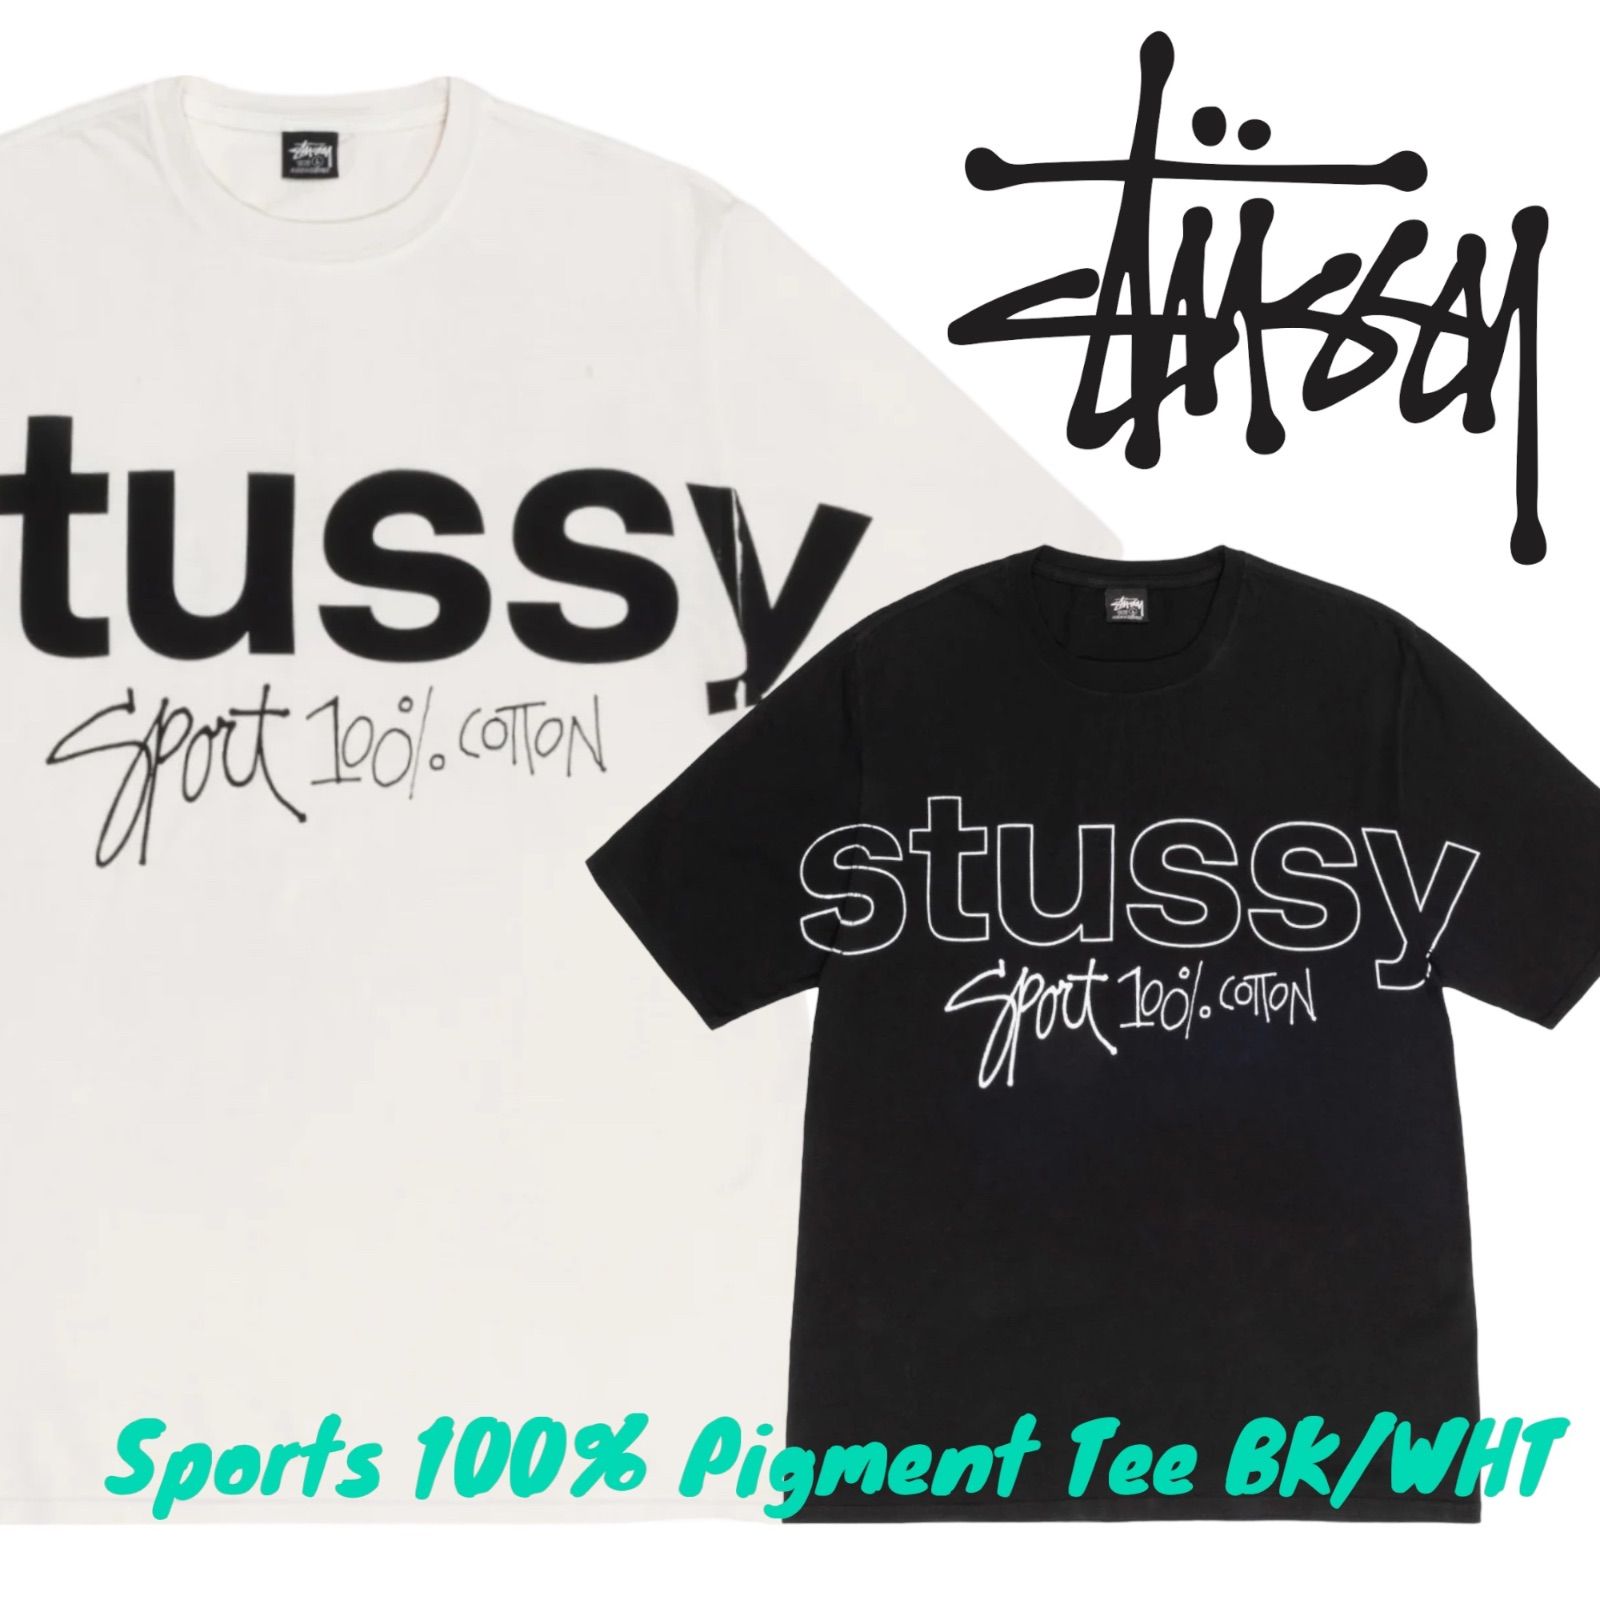 stussy sport 100% pigment dyed tee